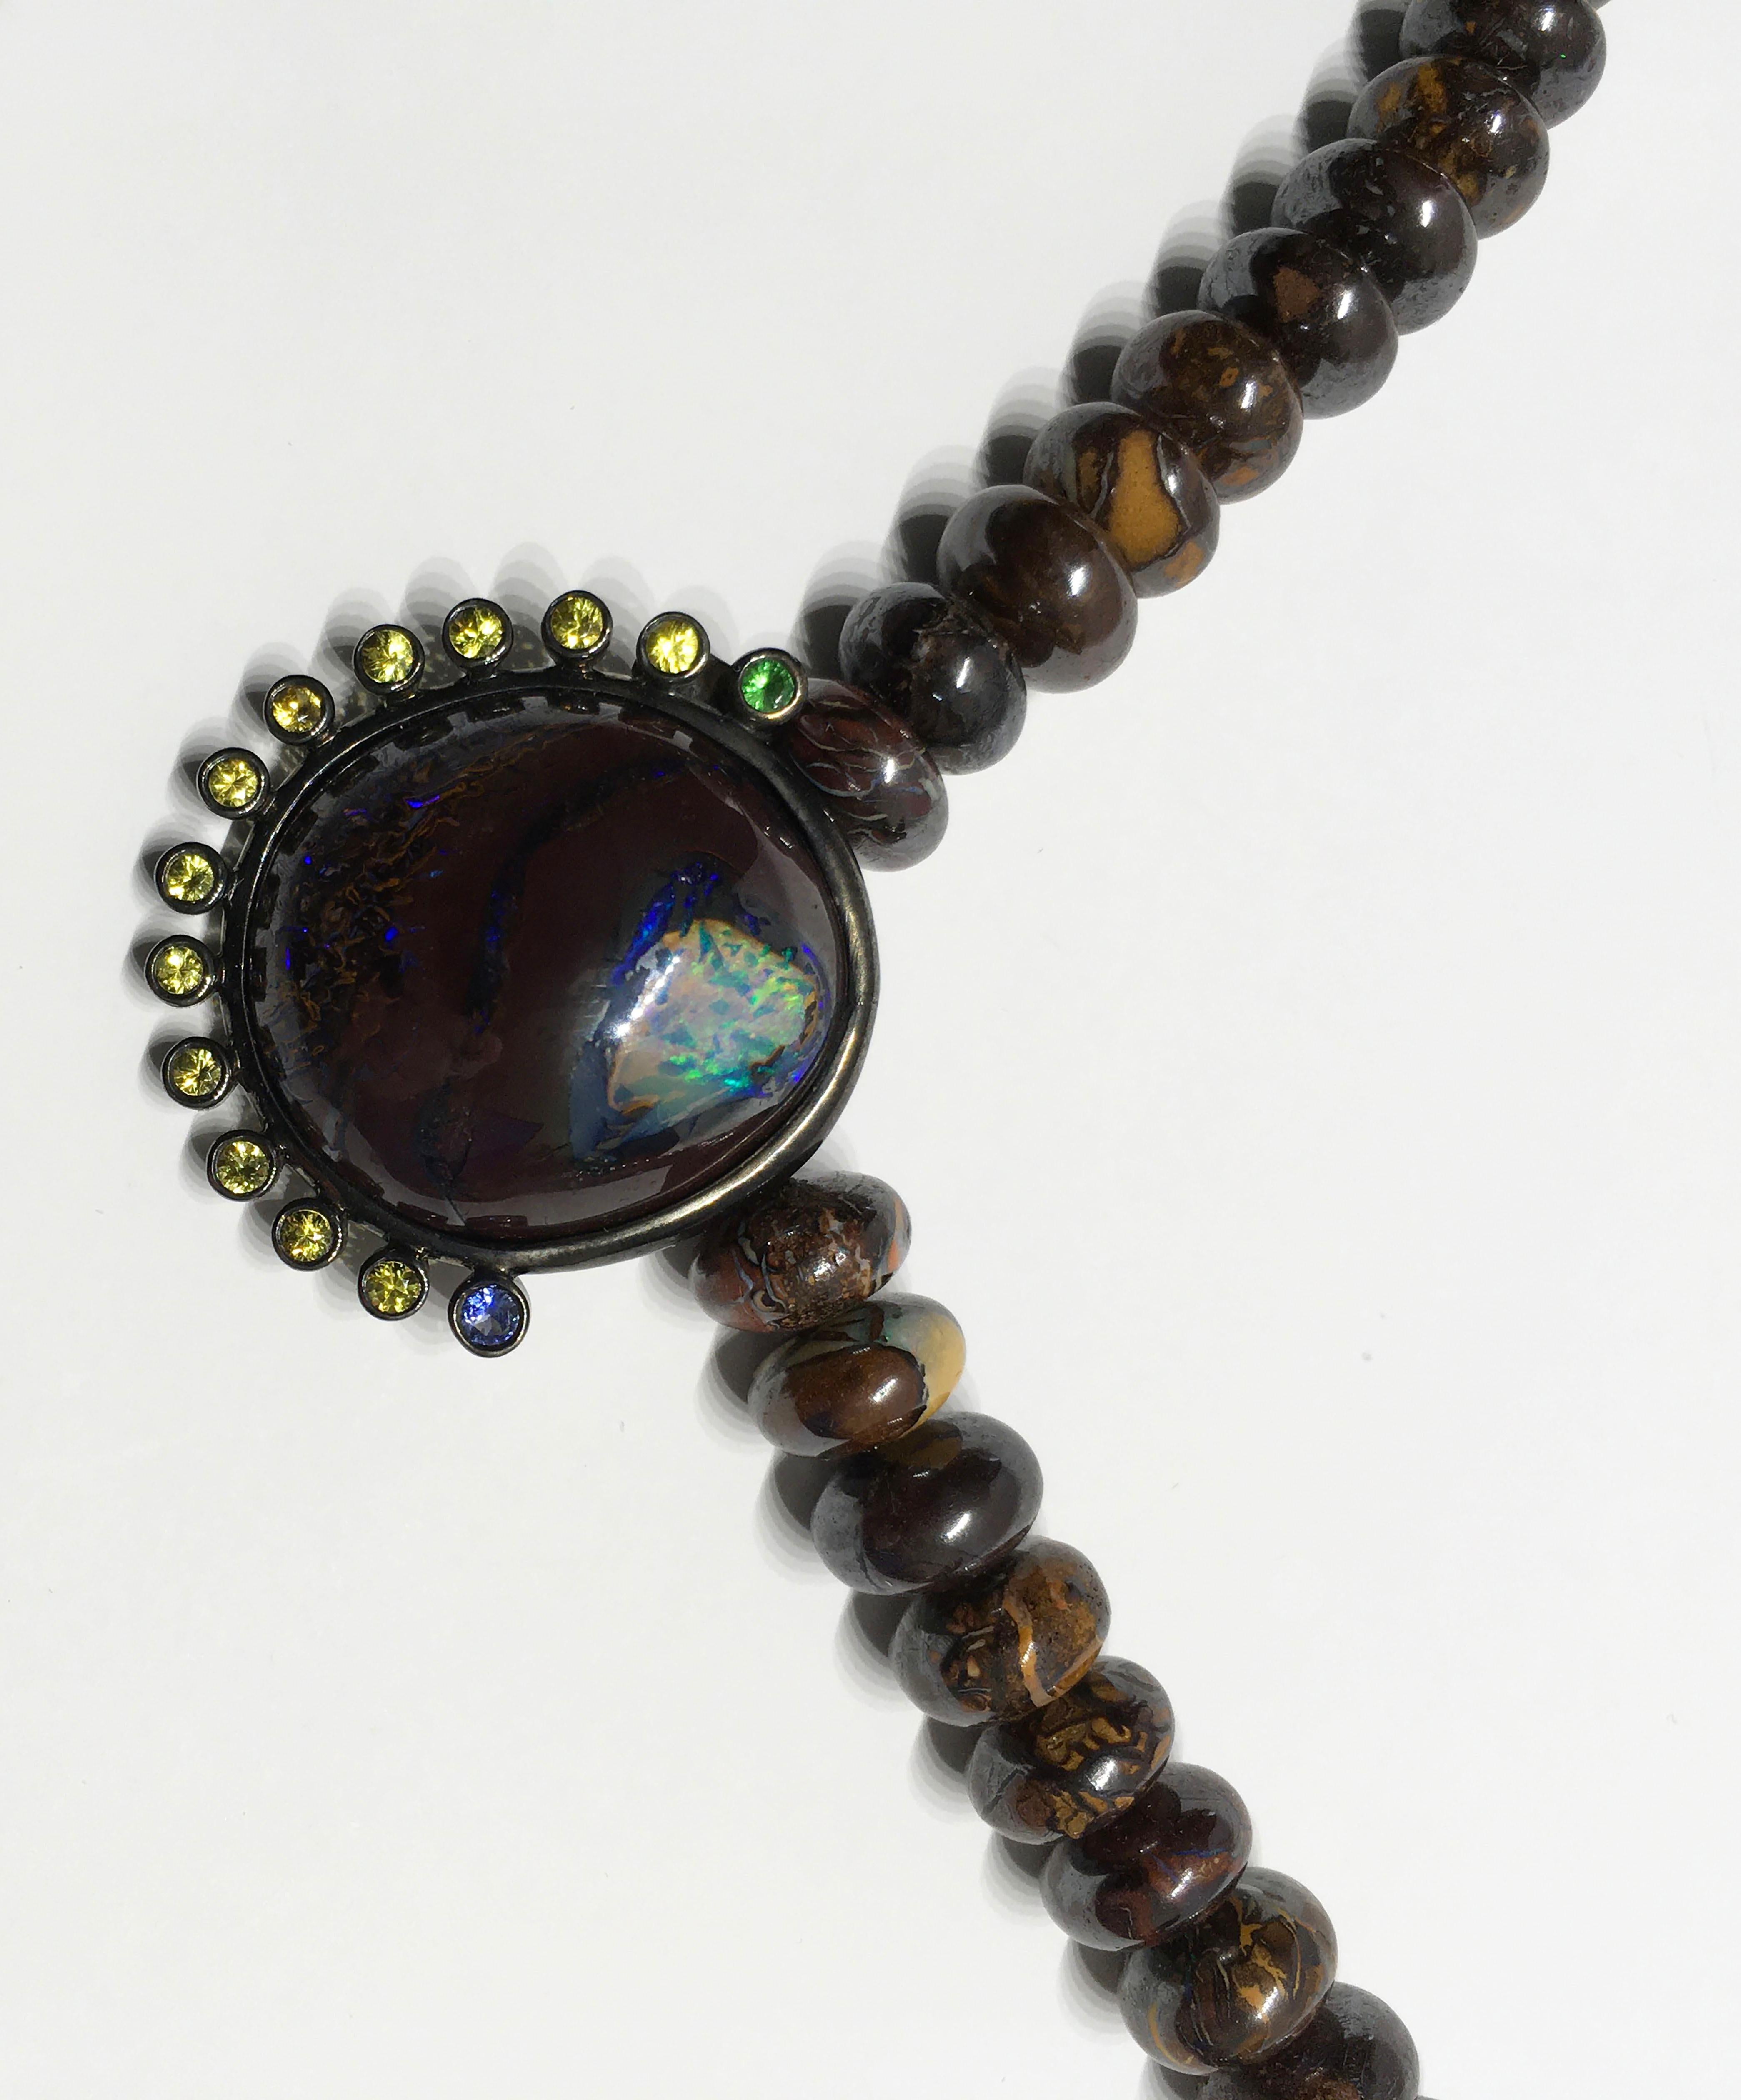 Cabochon Blackened Silver Pendant set with Opal, Sapphire and Tsavorite